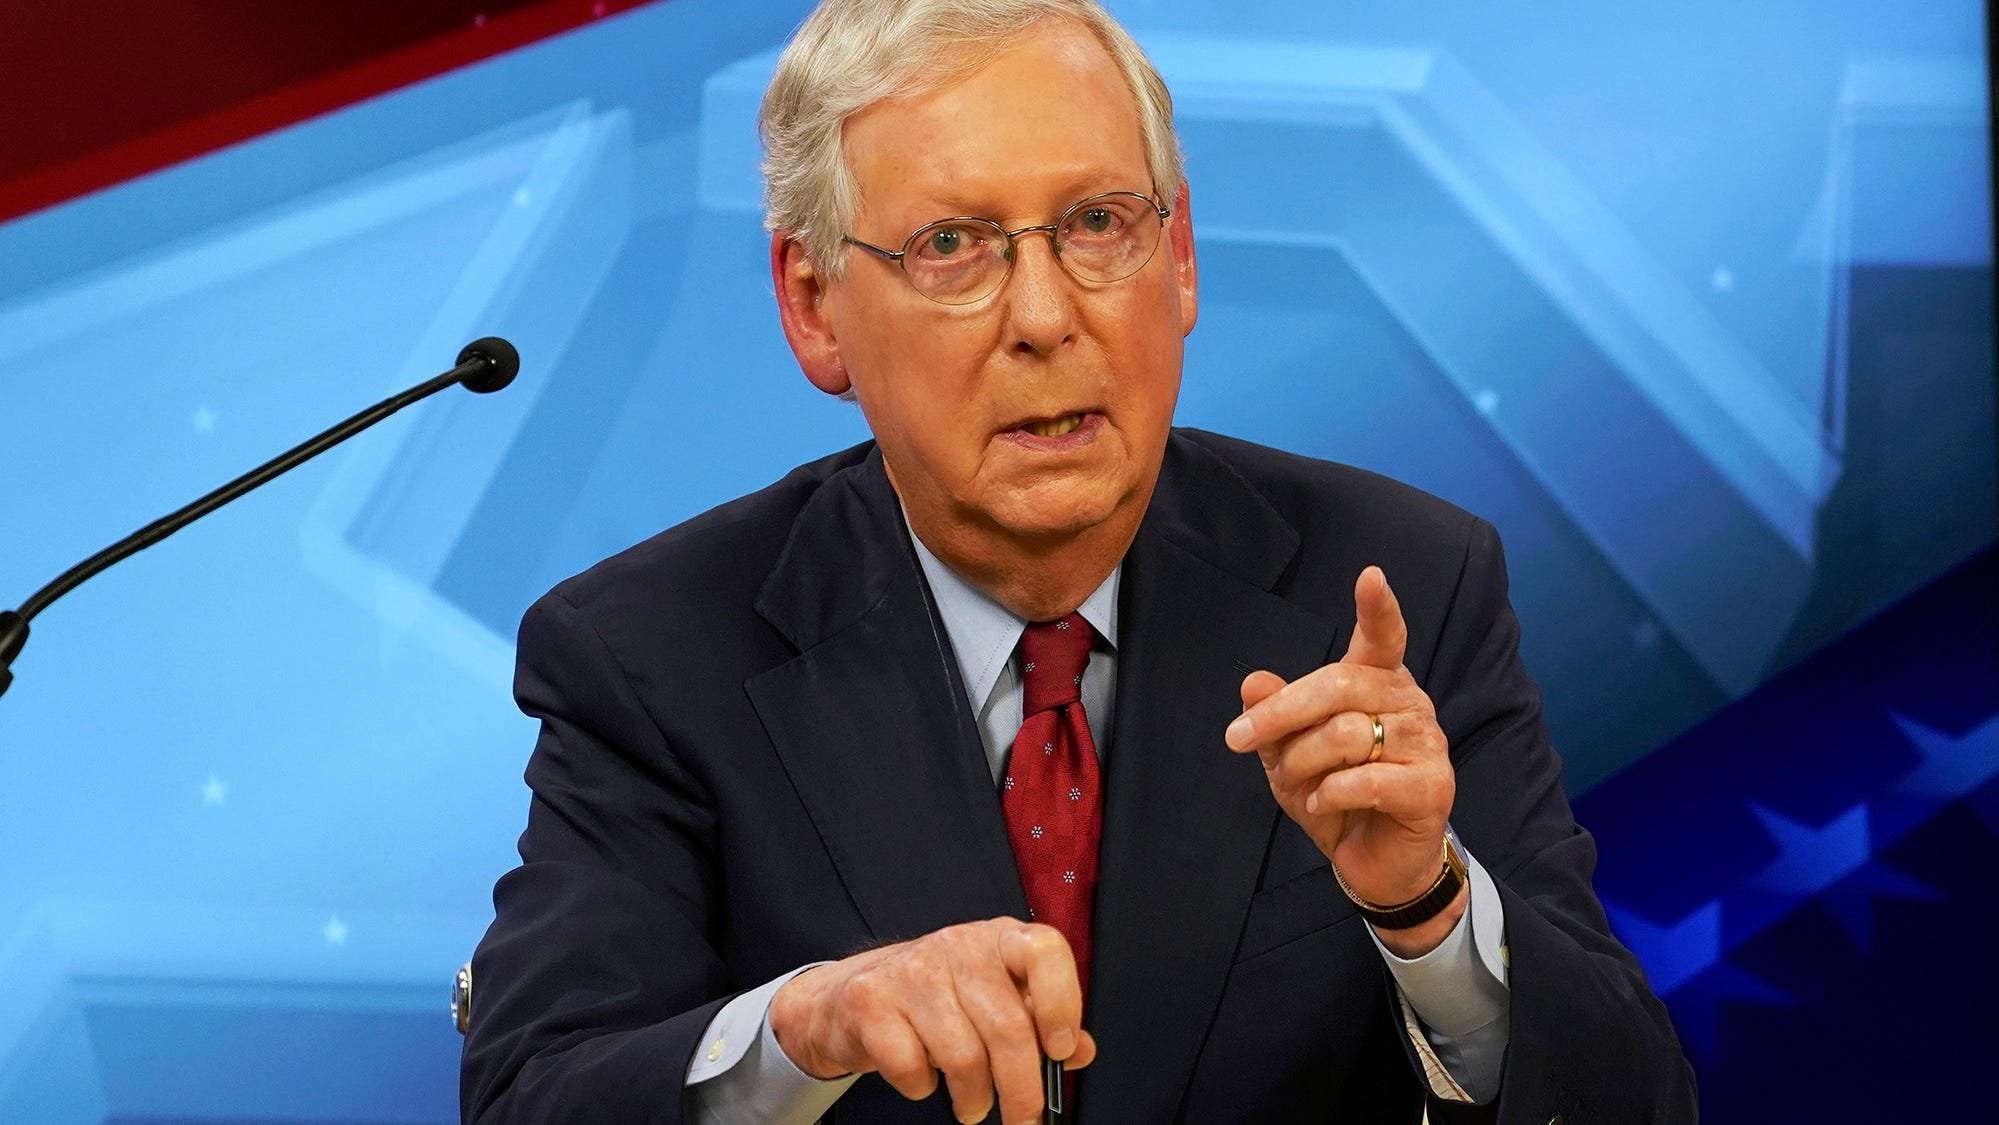 image for McConnell is a corporation masquerading as a human being. He abuses voters' trust